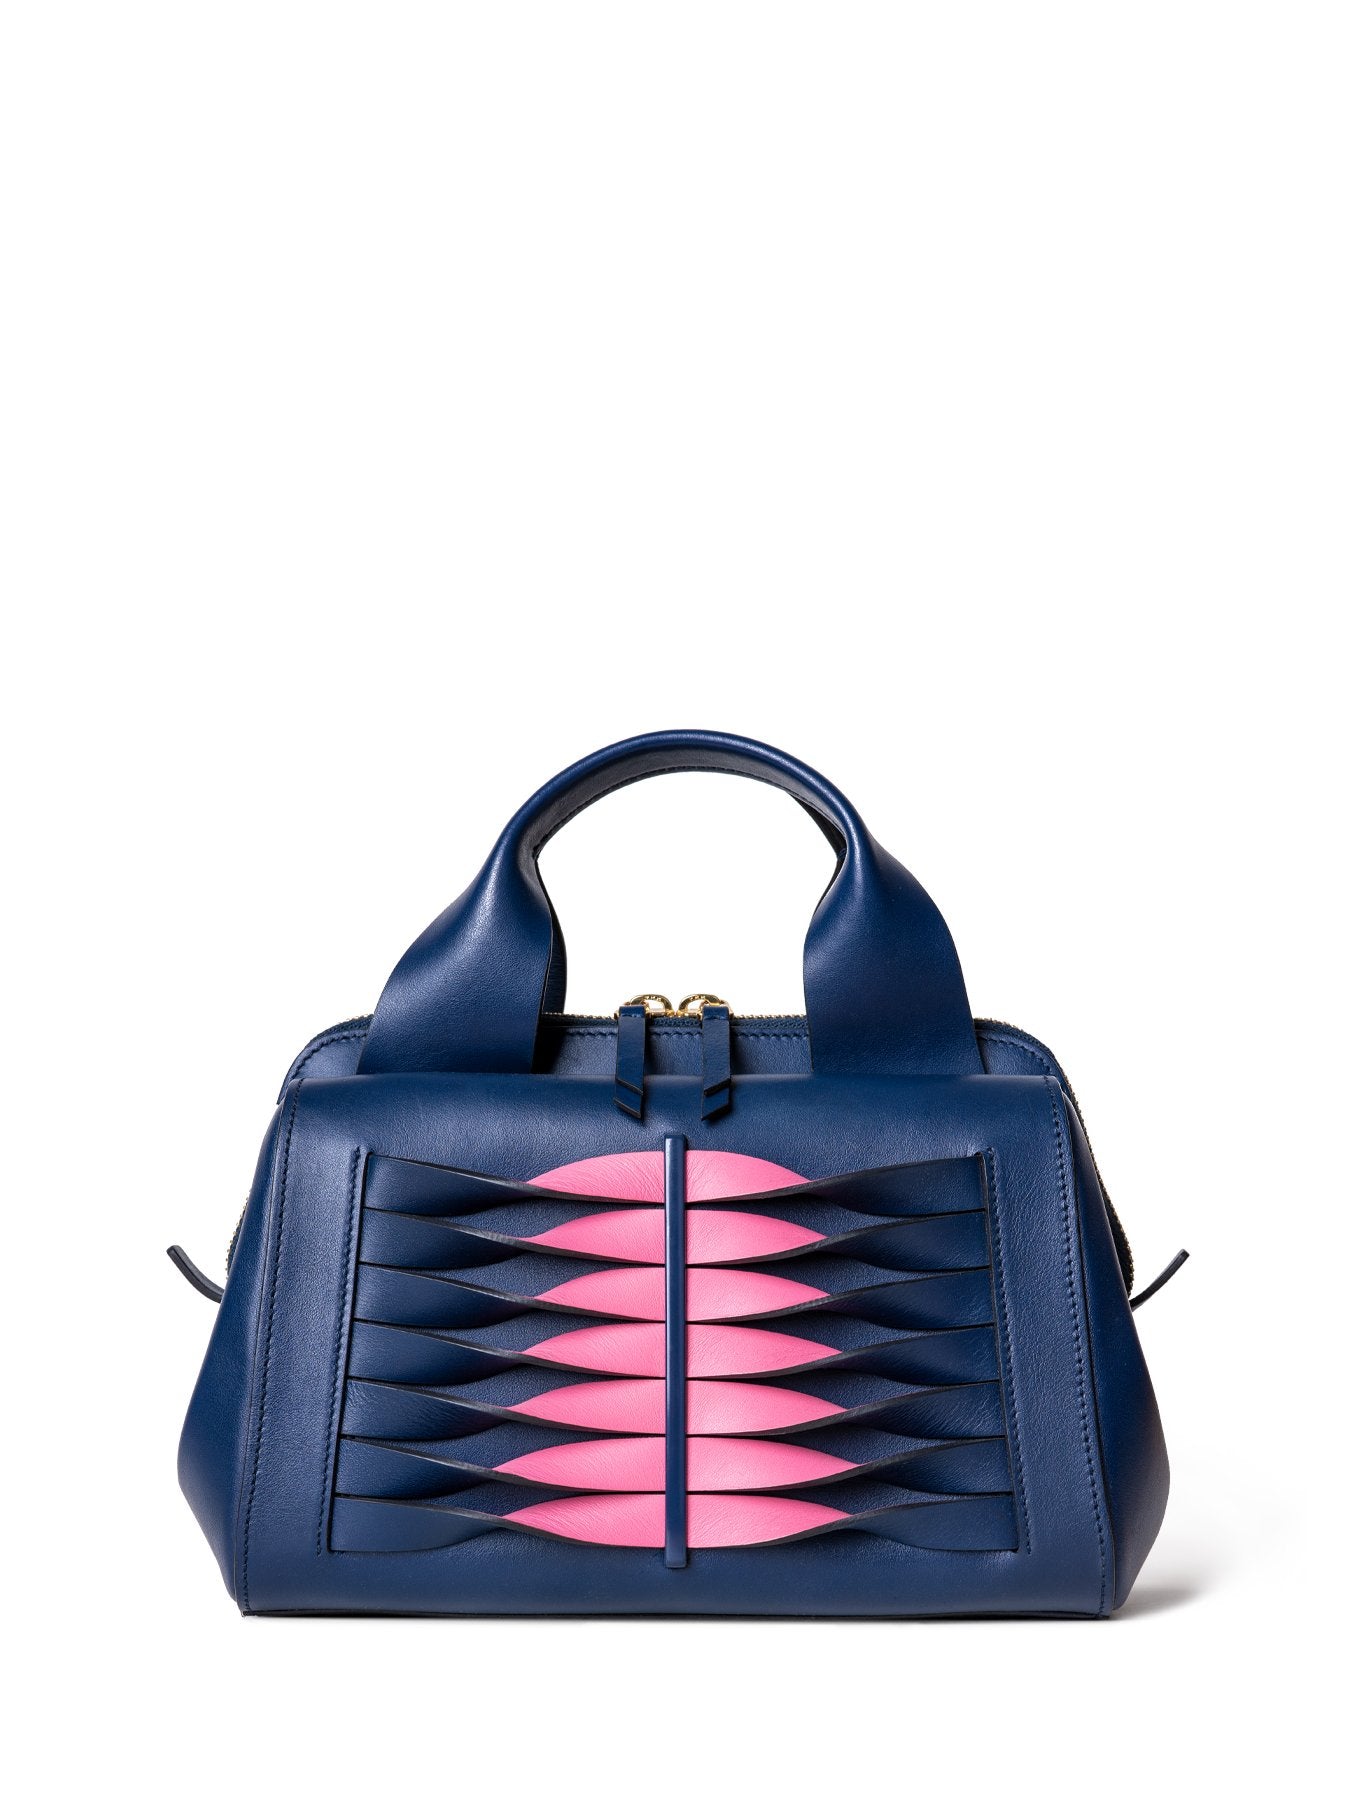 Shoulder bag with handle in blue leather